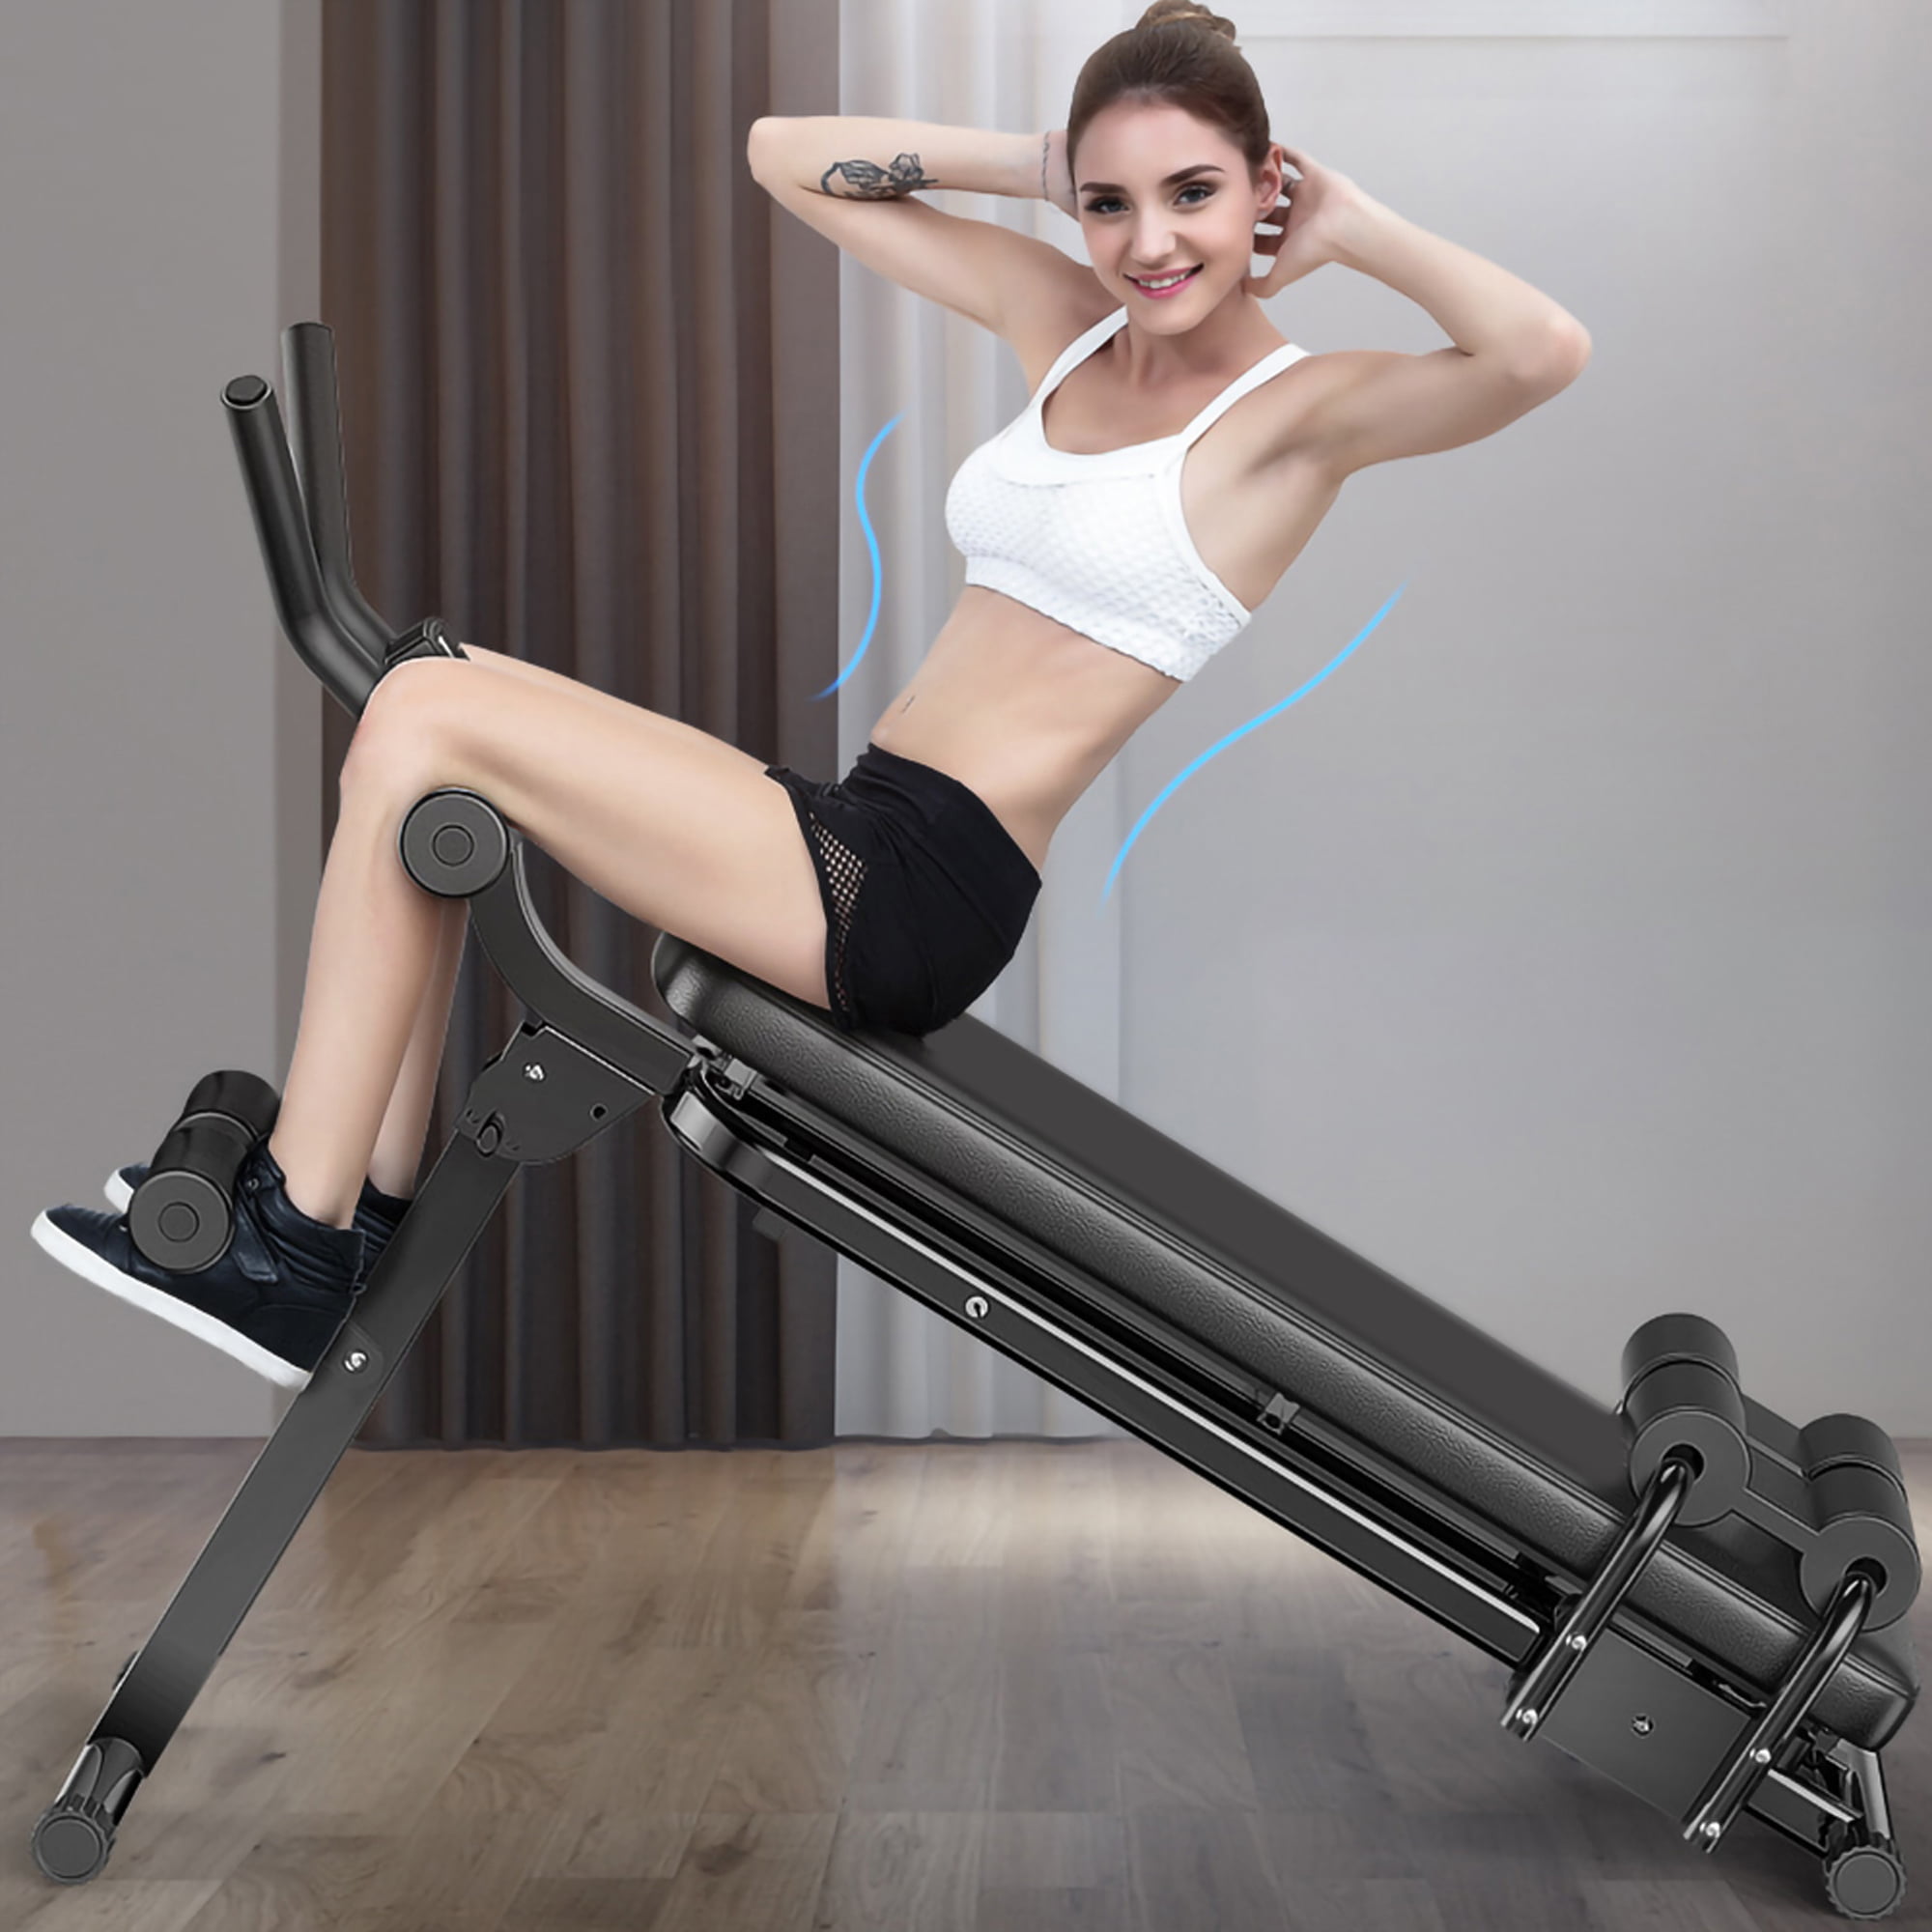 Foldable Adjustable Sit Up Abdominal Bench Press Weight Gym Ab Exercise Fitness 